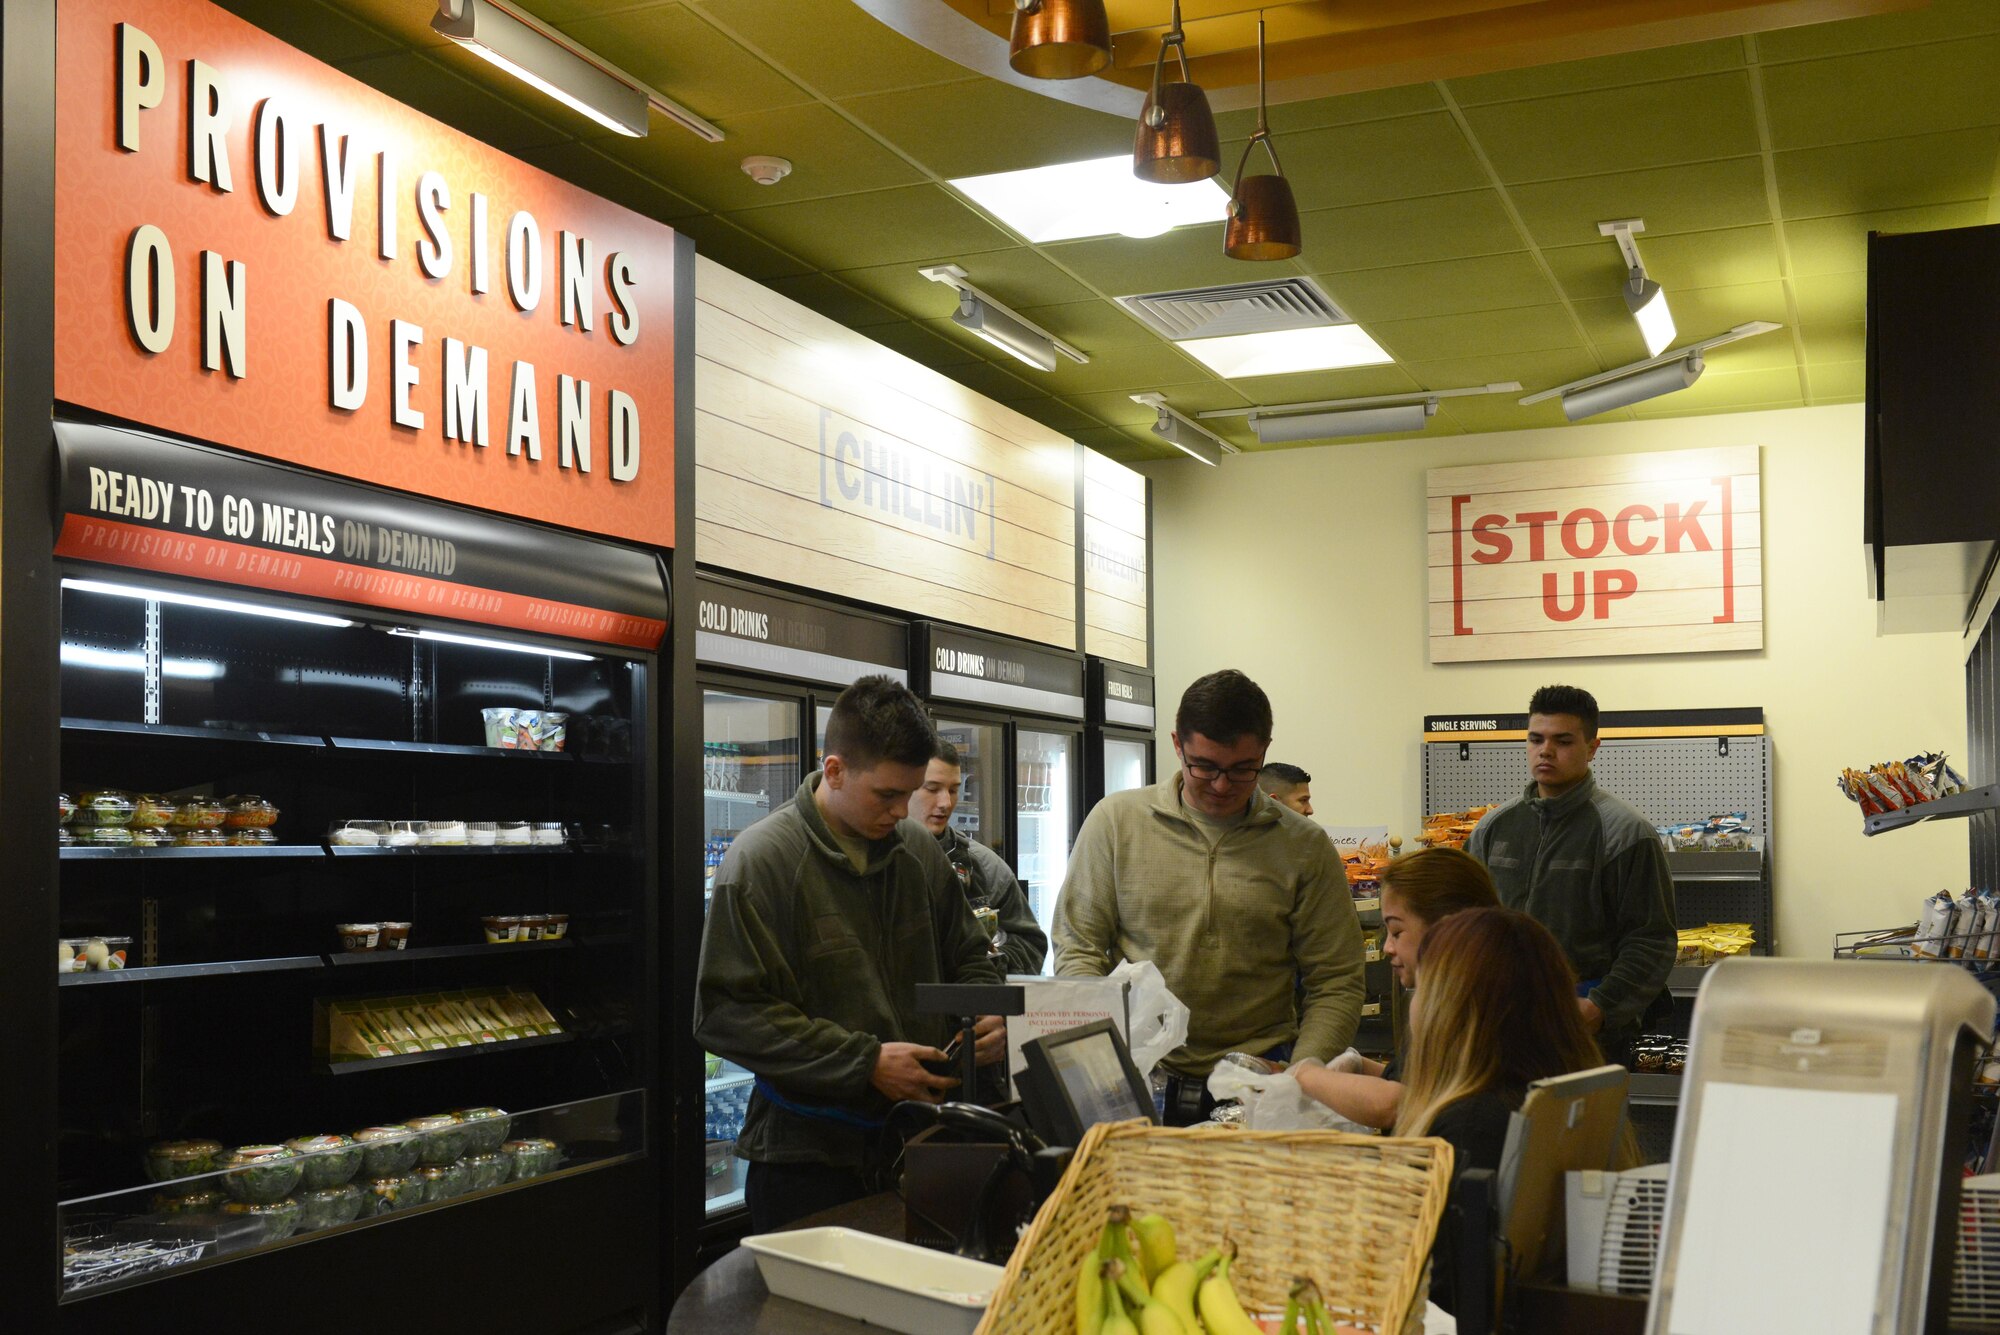 Customers line up at the Provisions on Demand at Joint Base Elmendorf-Richardson, Alaska, April 25, 2017. The meals are in to-go containers because the POD’s primary customers are flightline personnel who do not have a lot of time and need hot meals. 